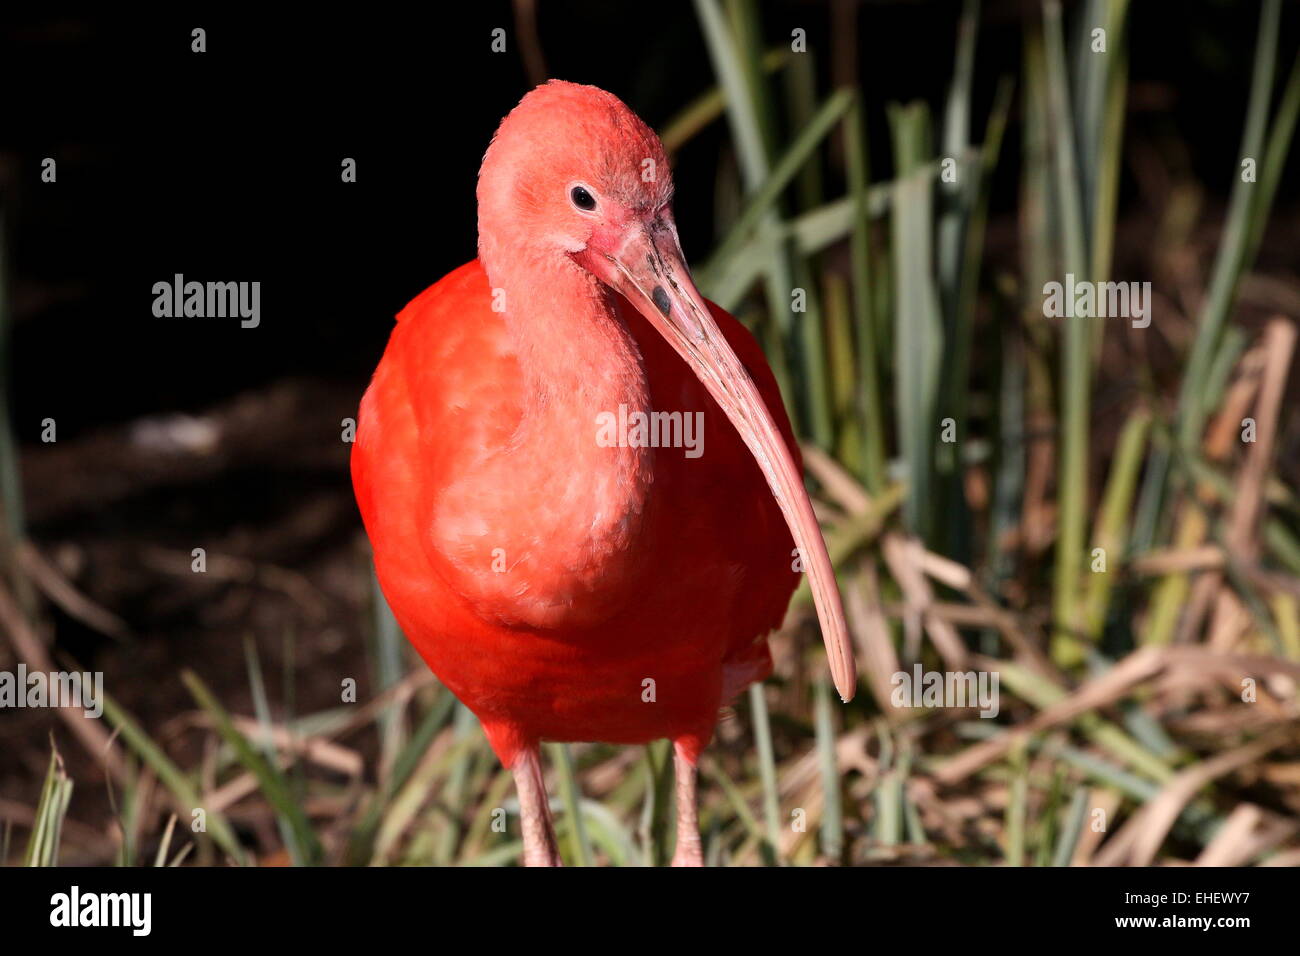 Close-up of a South American  Scarlet Ibis (Eudocimus ruber) Stock Photo